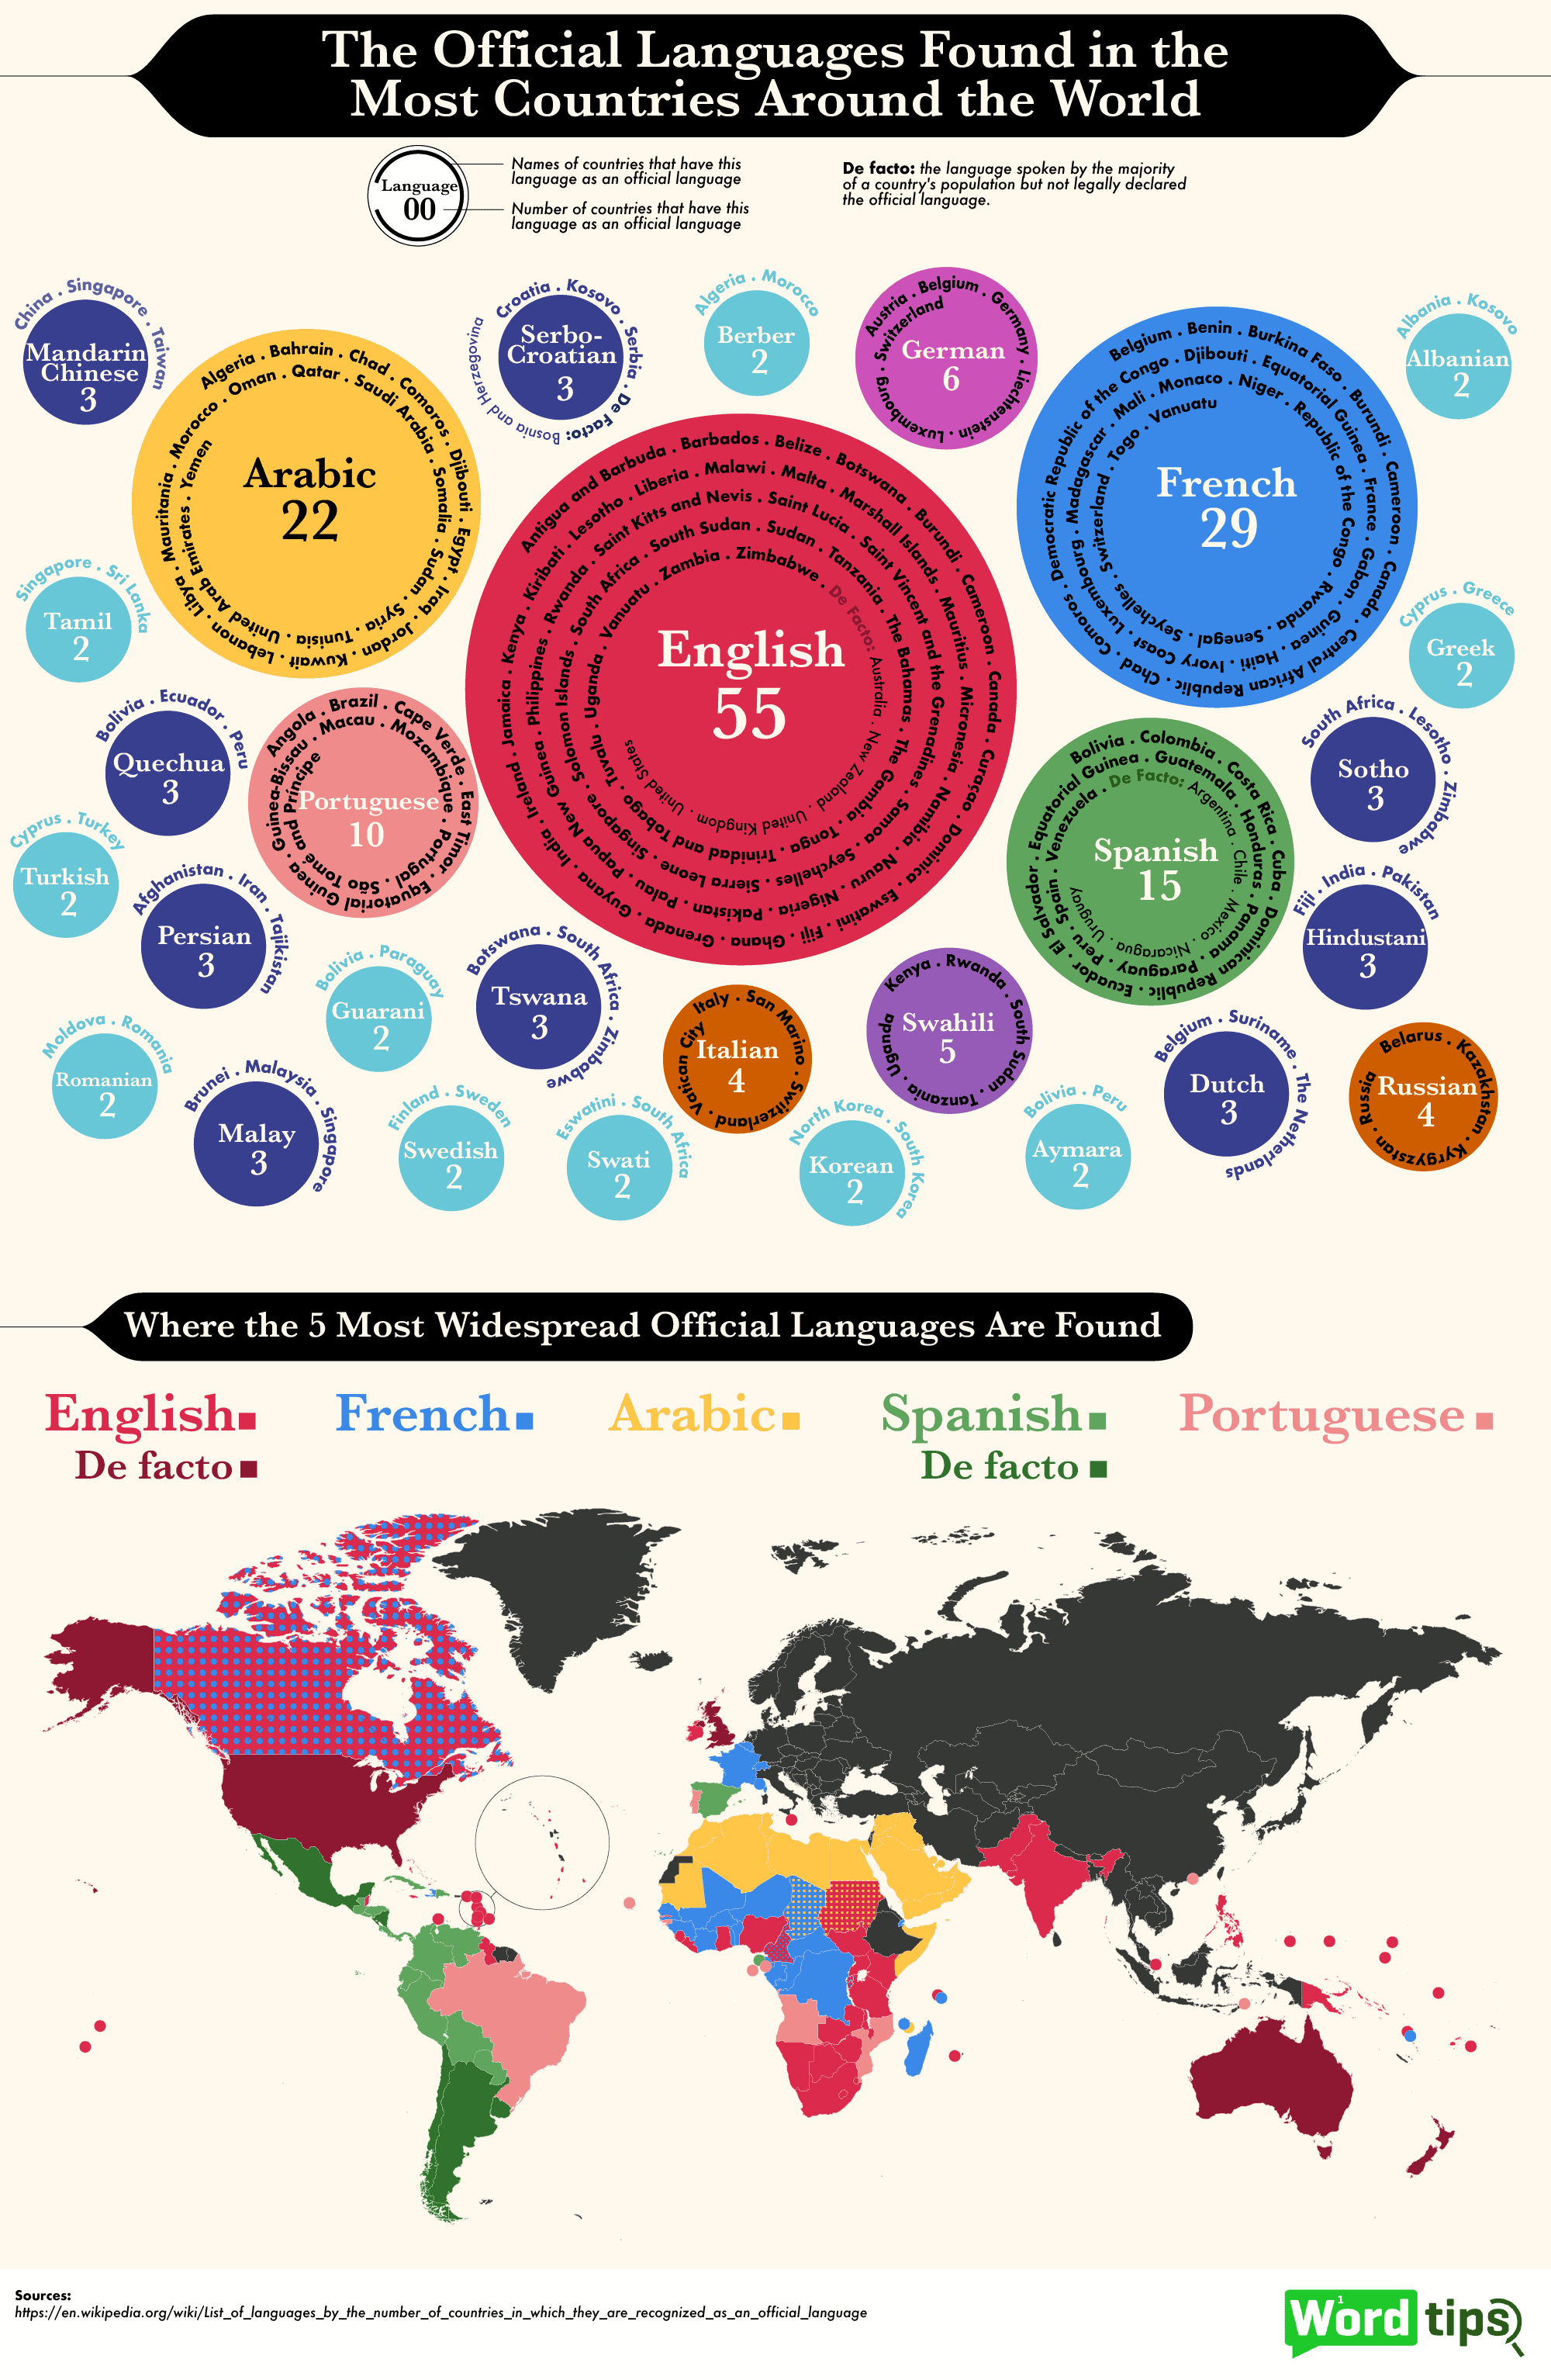 Which Languages Are the Official Languages for the Most Countries